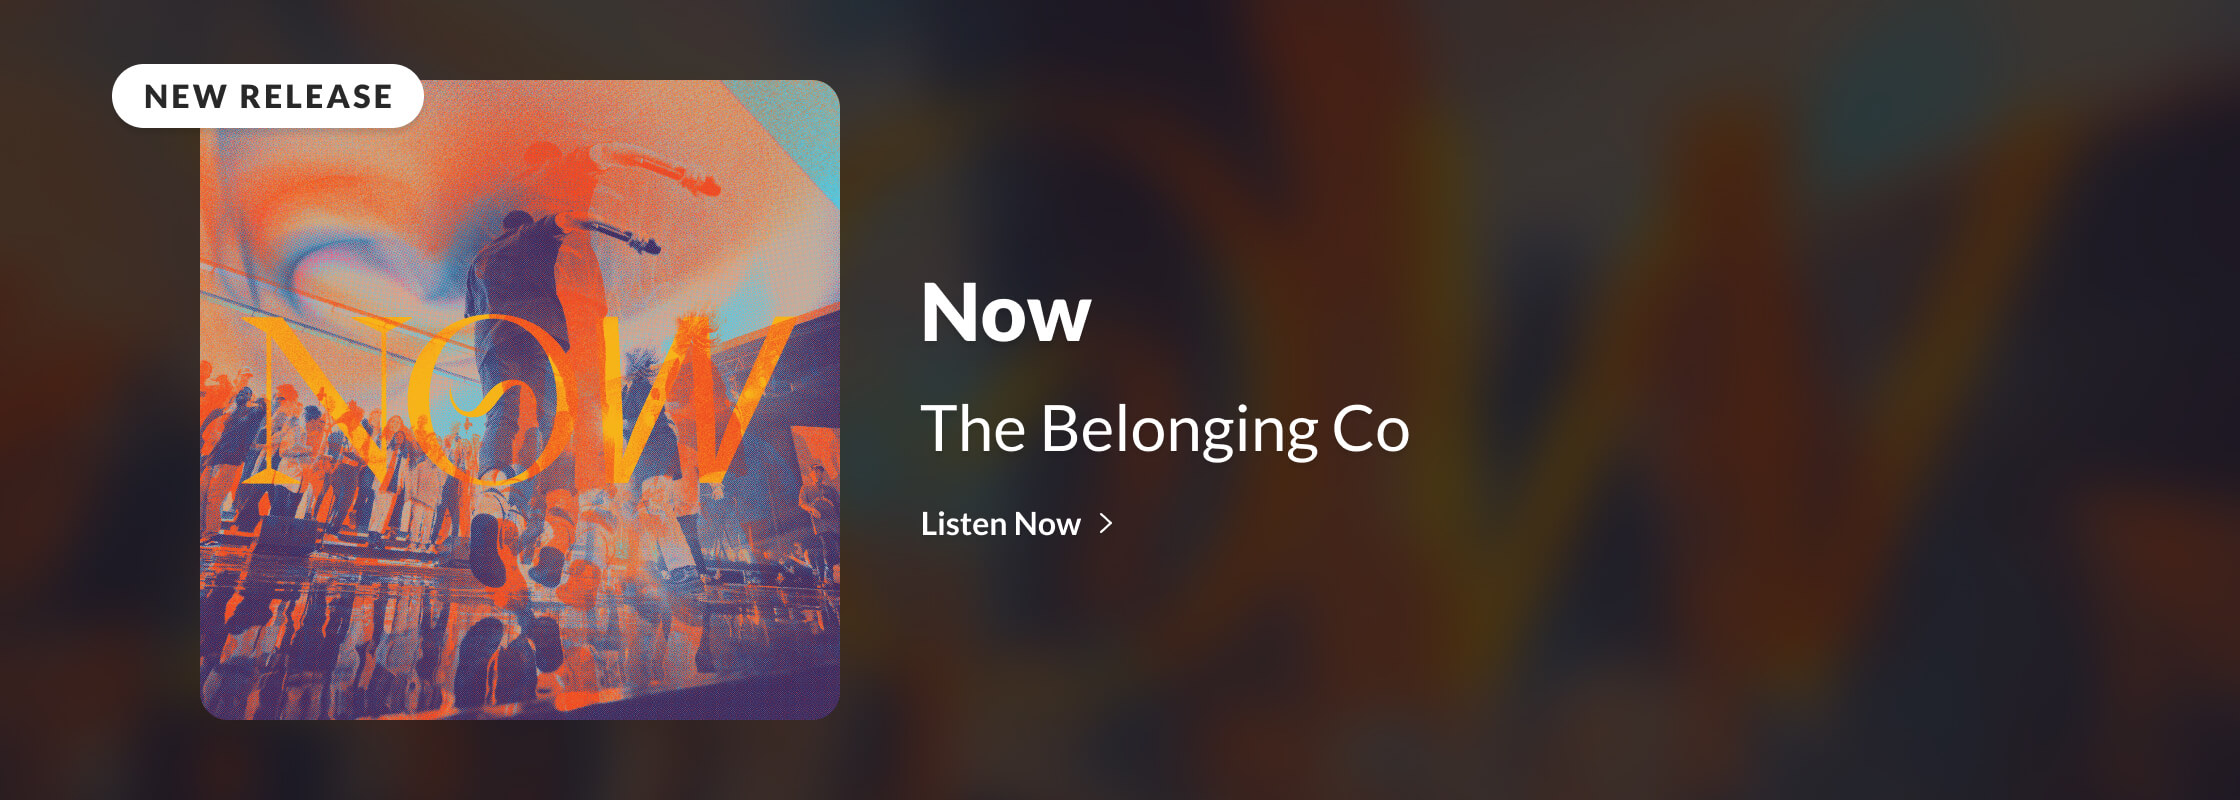 The Belonging Co | NOW